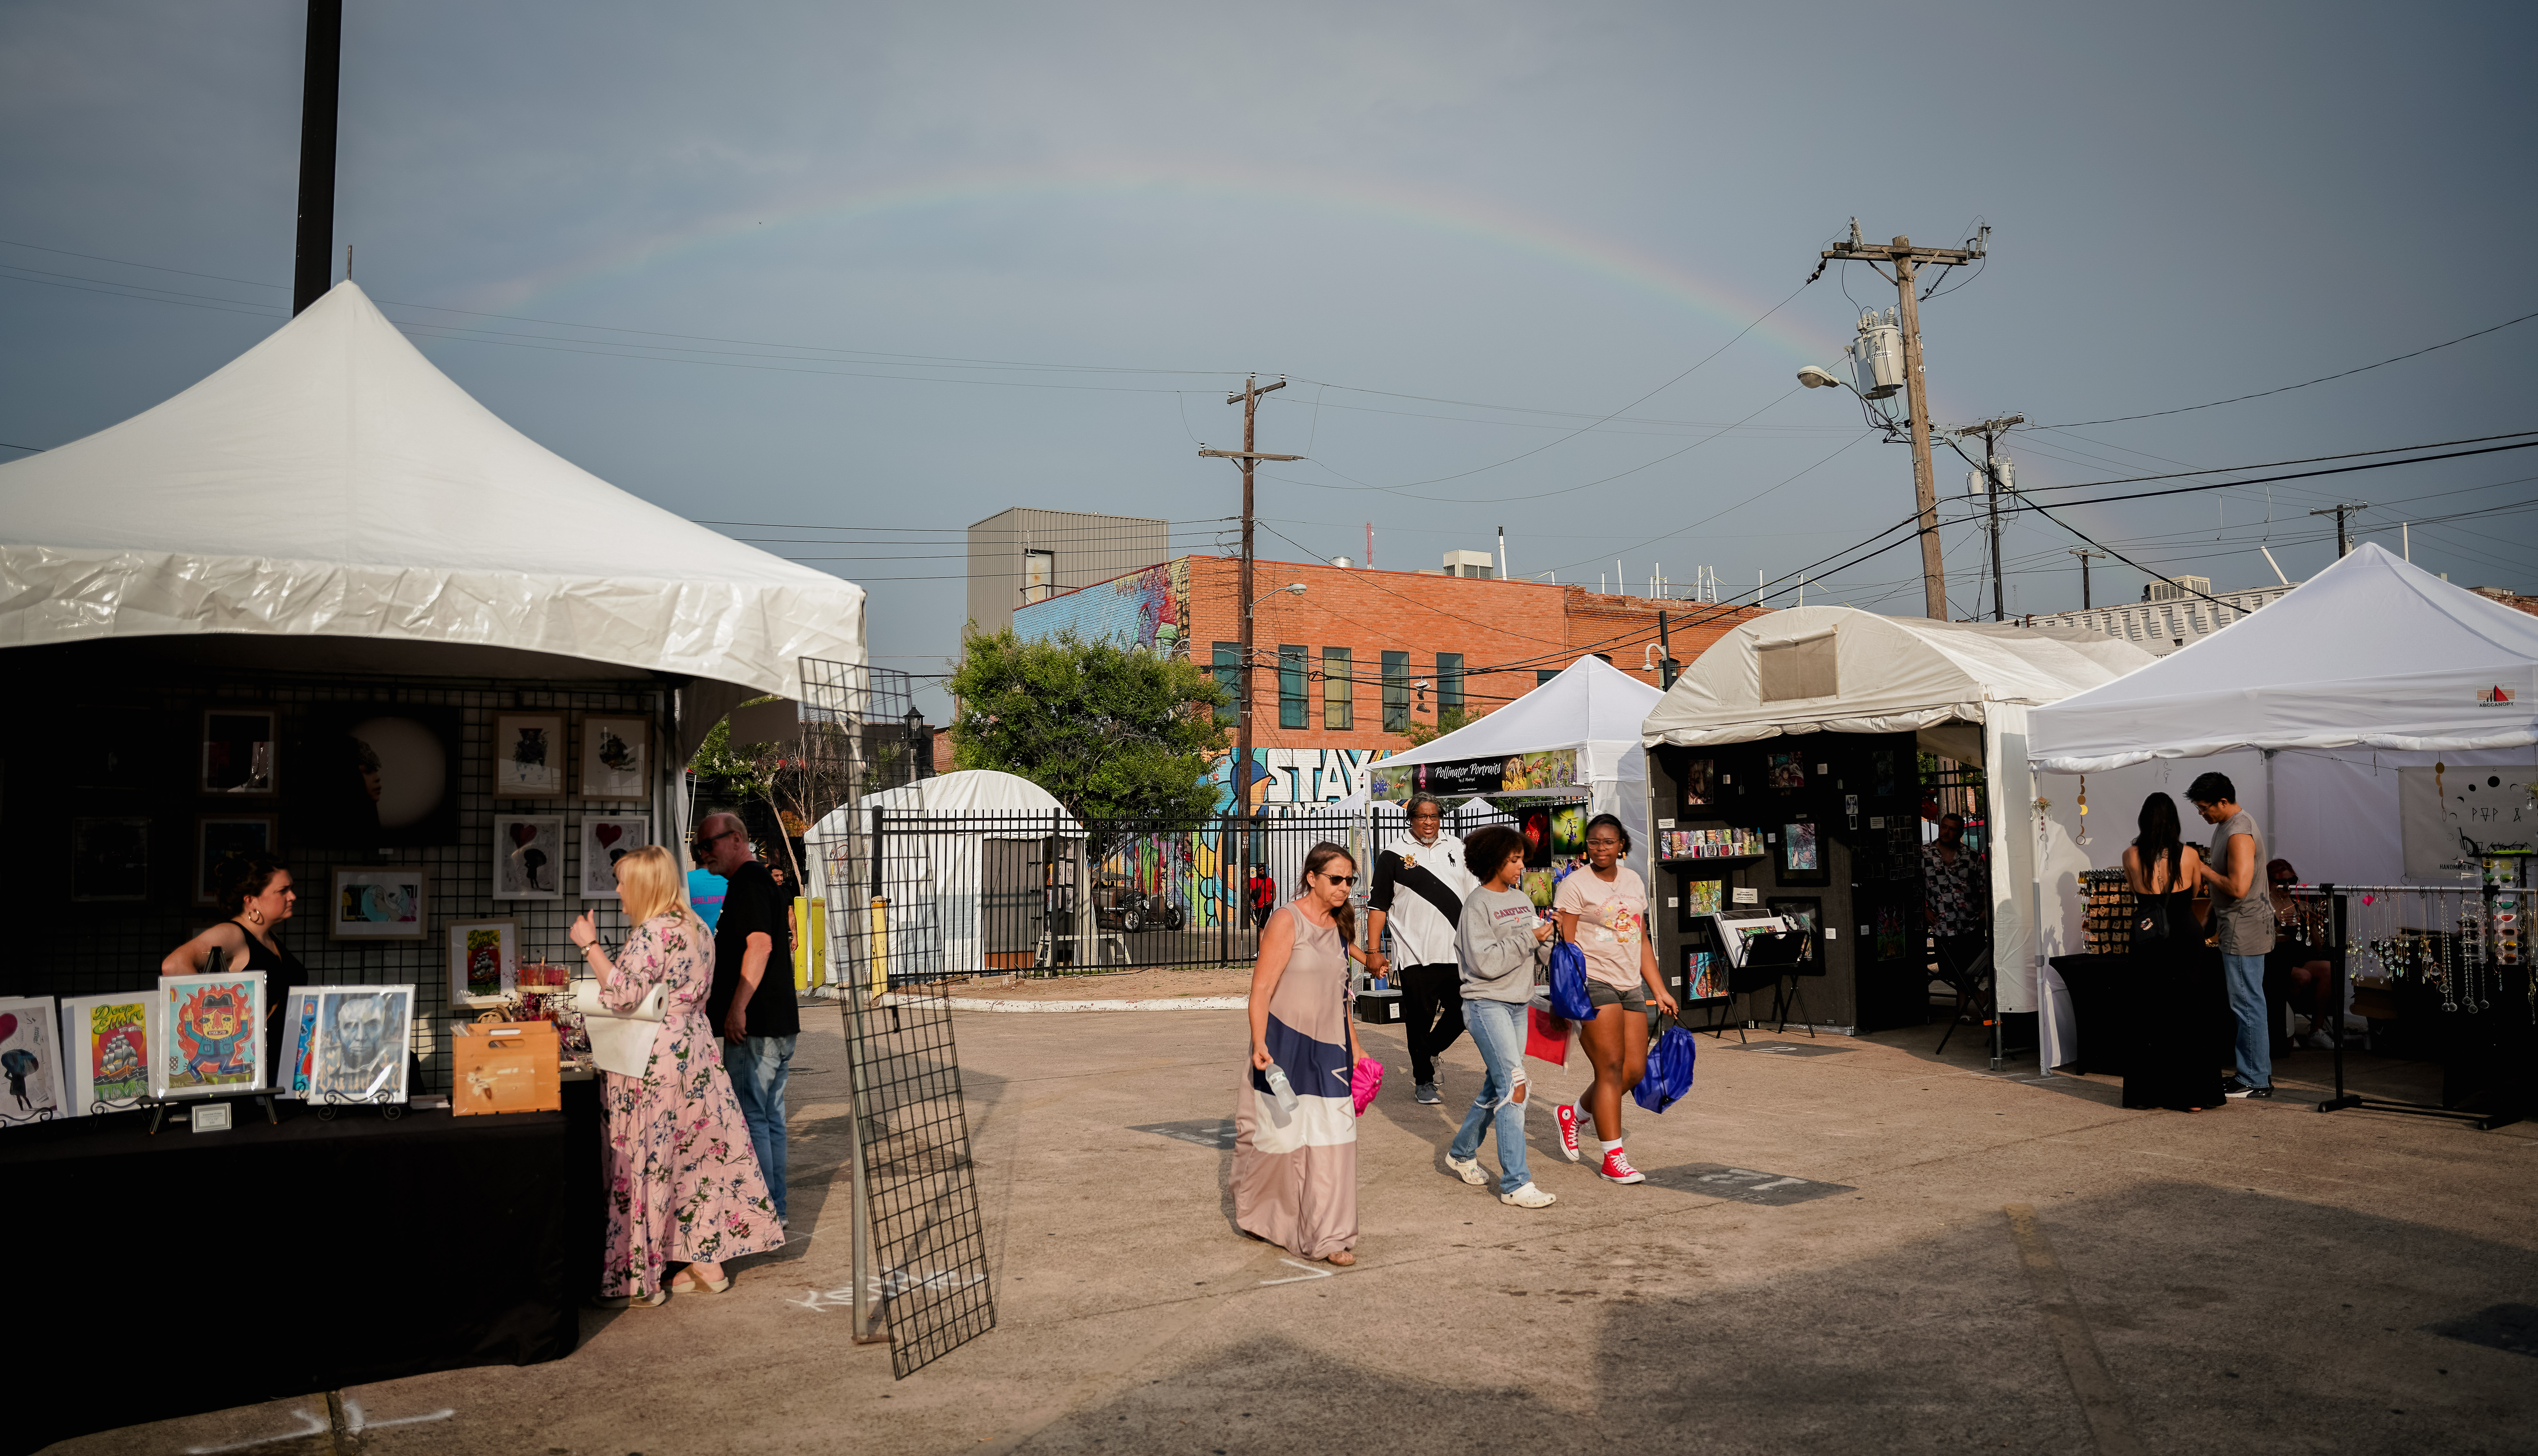 A rainbow over some vendor booths